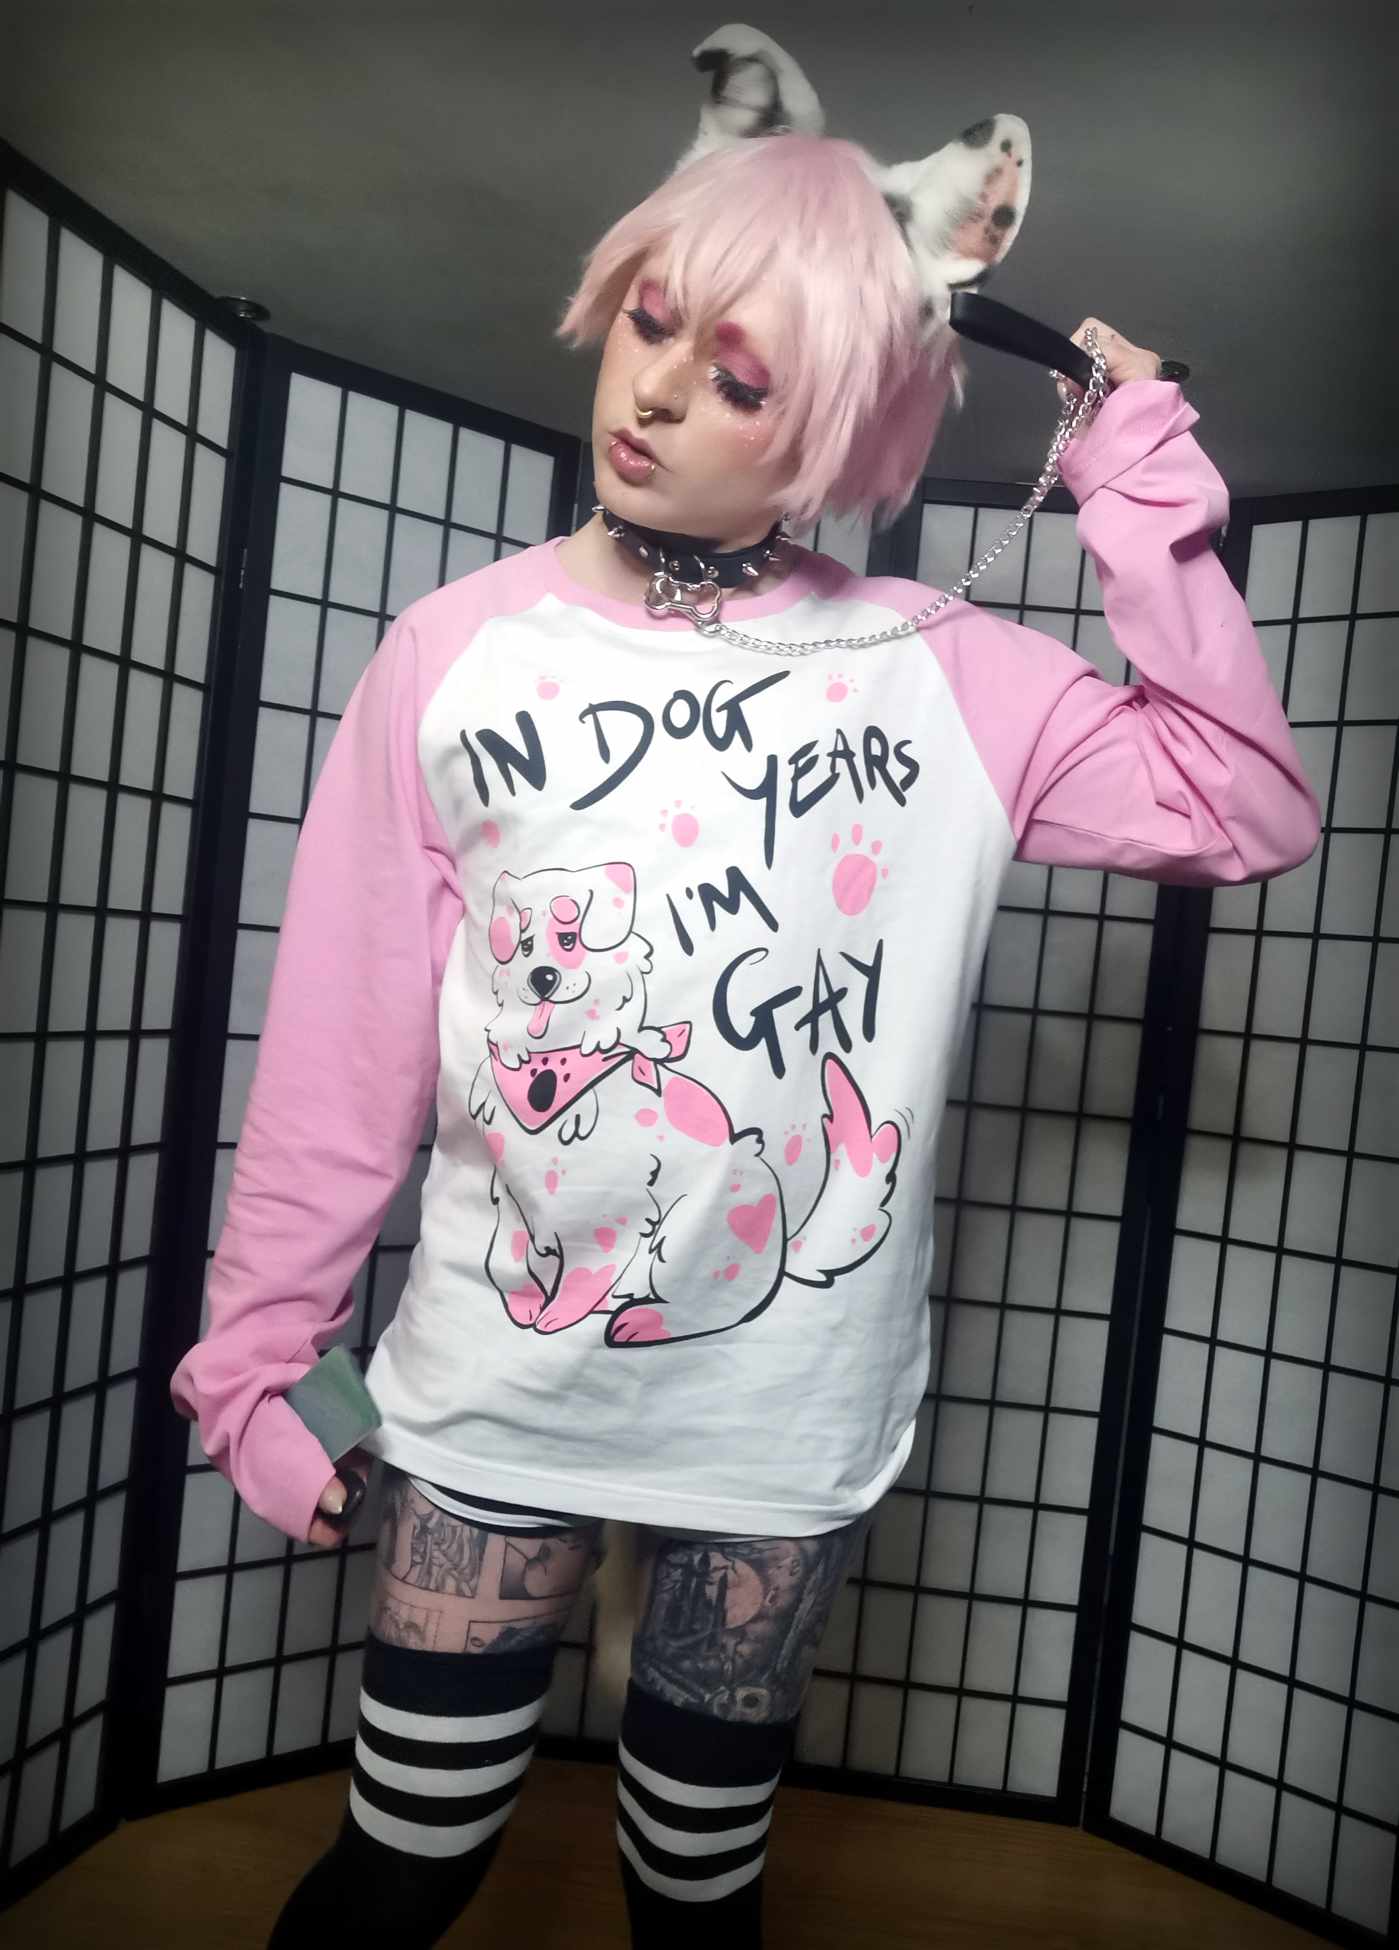 In Dog Years I'm Gay Full Outfit/T-shirt (Sizes: S-XXL)